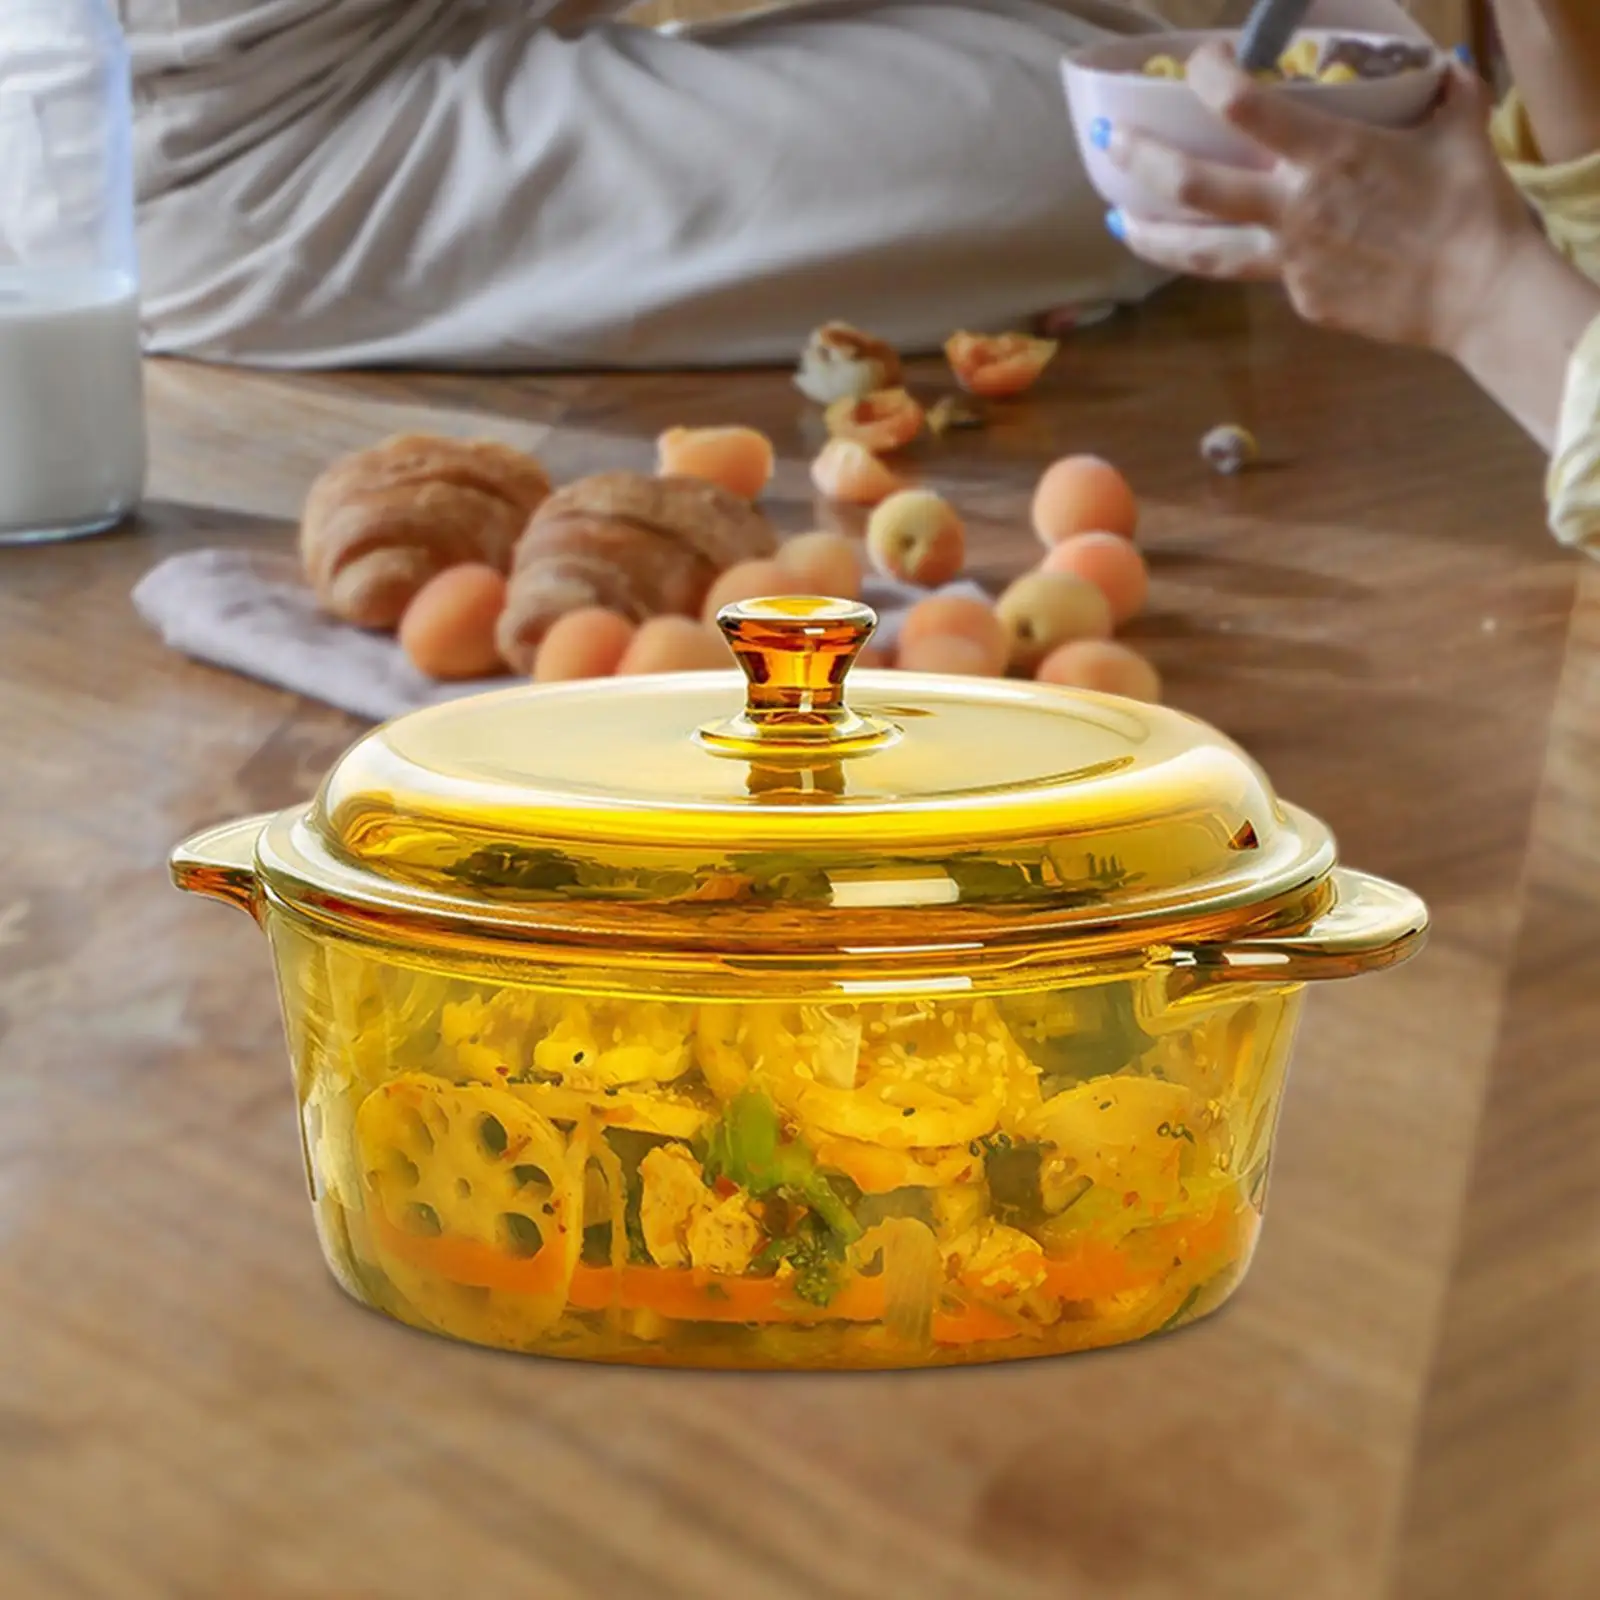 Glass Salad Bowl Fridge Portable with Lid Handle Soup Bowl with Lid Glass Casserole Dish for Pasta Dessert Cereal Vegetable